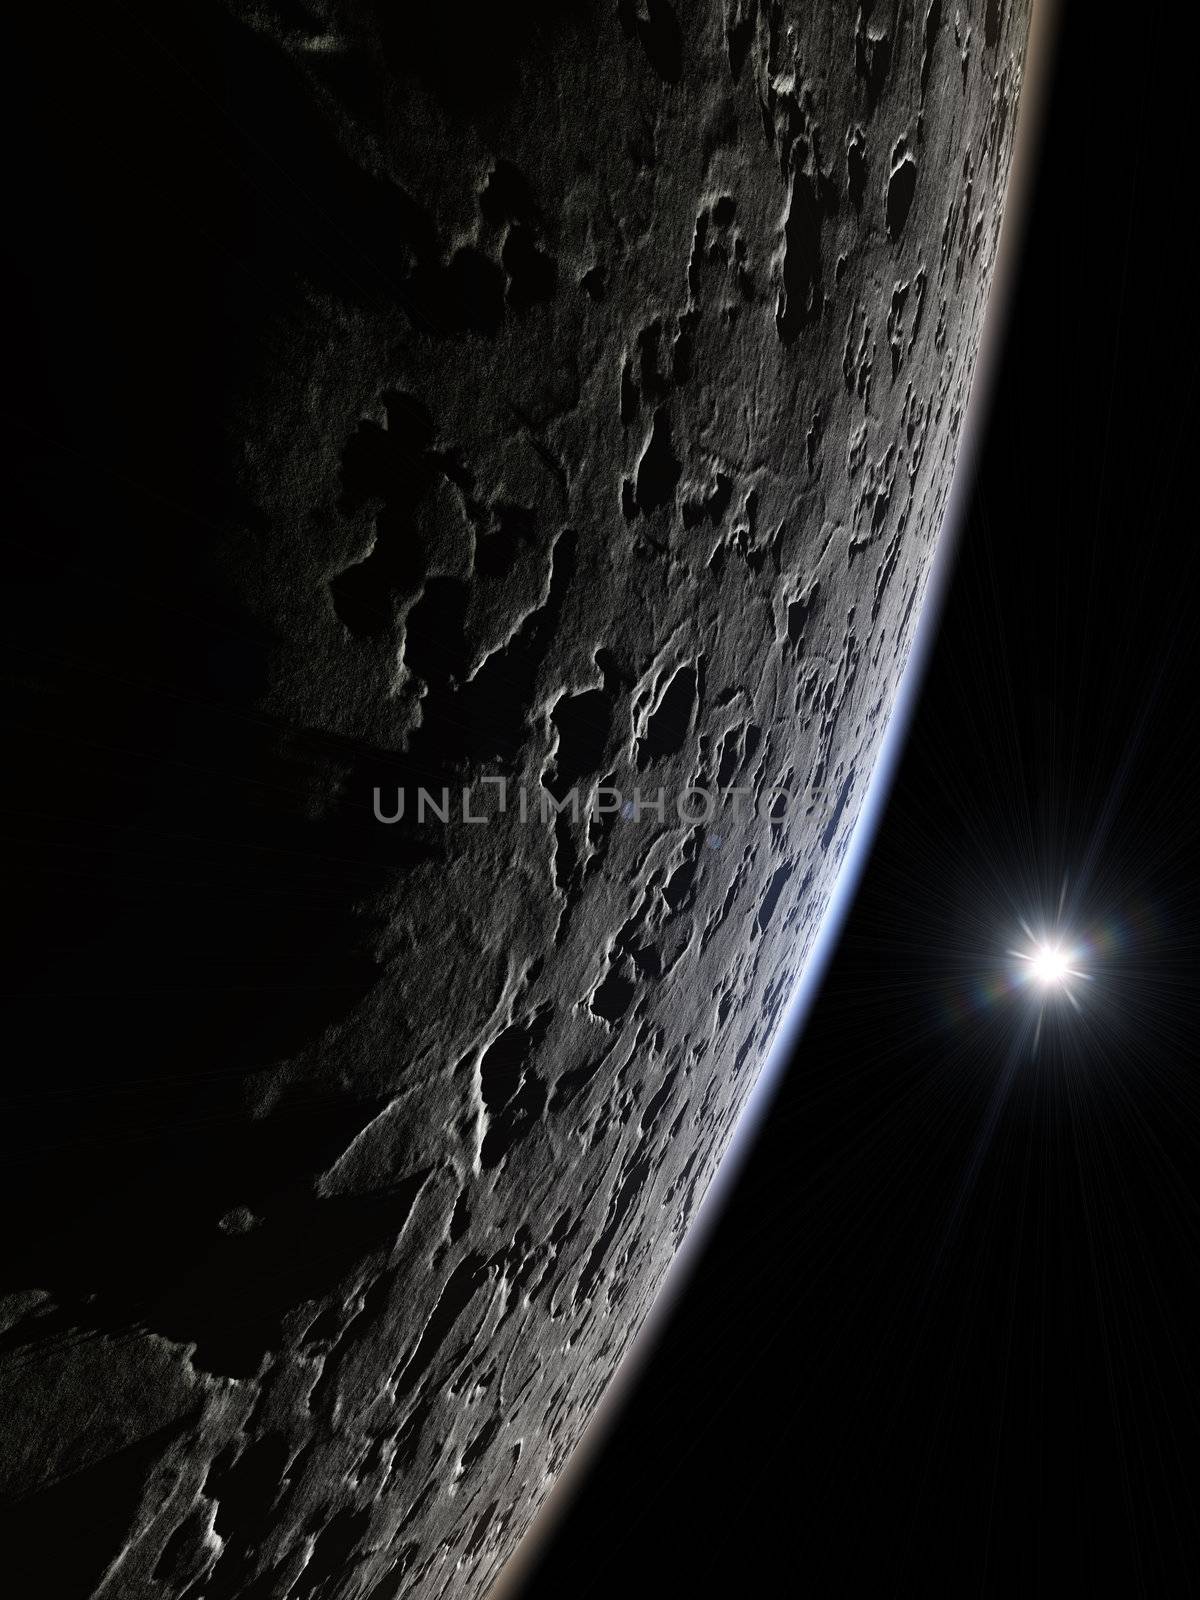 An illustration of a nice deep space moon background